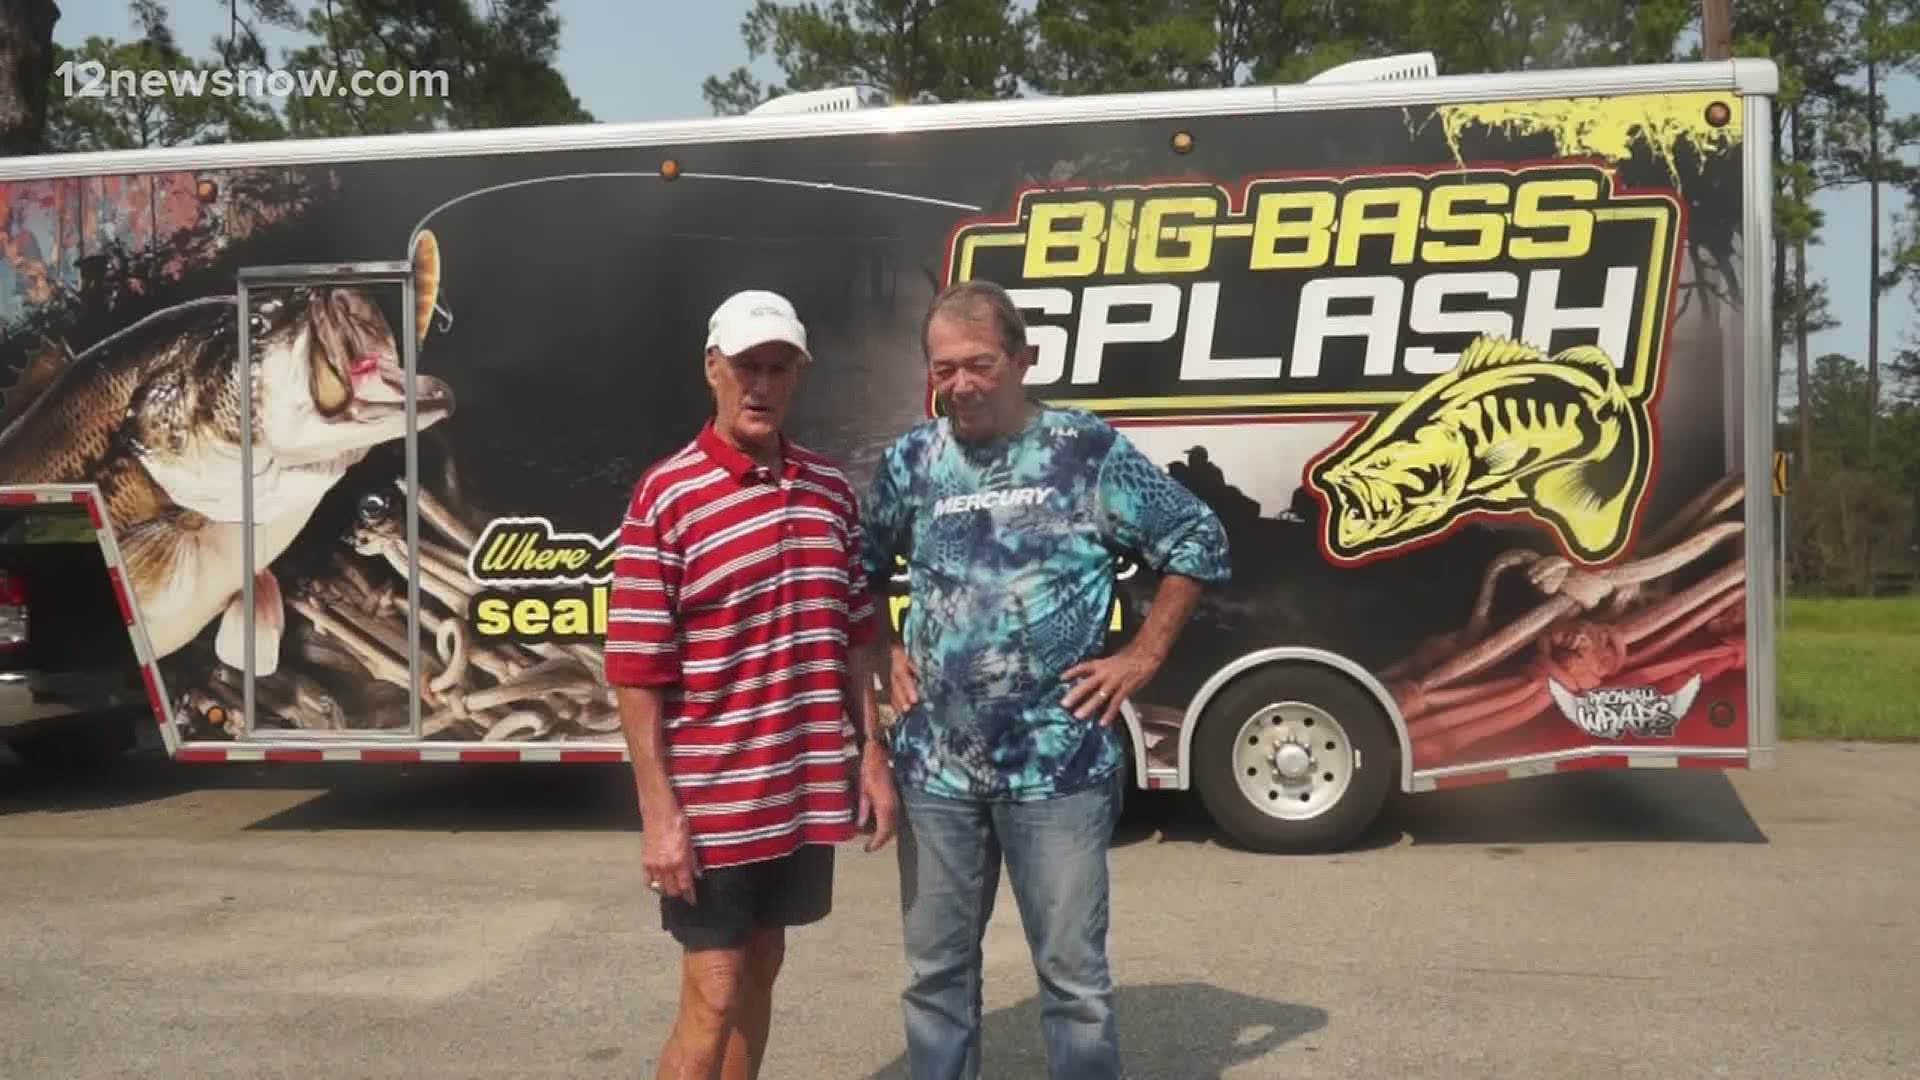 $600,000 worth of cash prizes will be awarded at the Big Bass Splash!